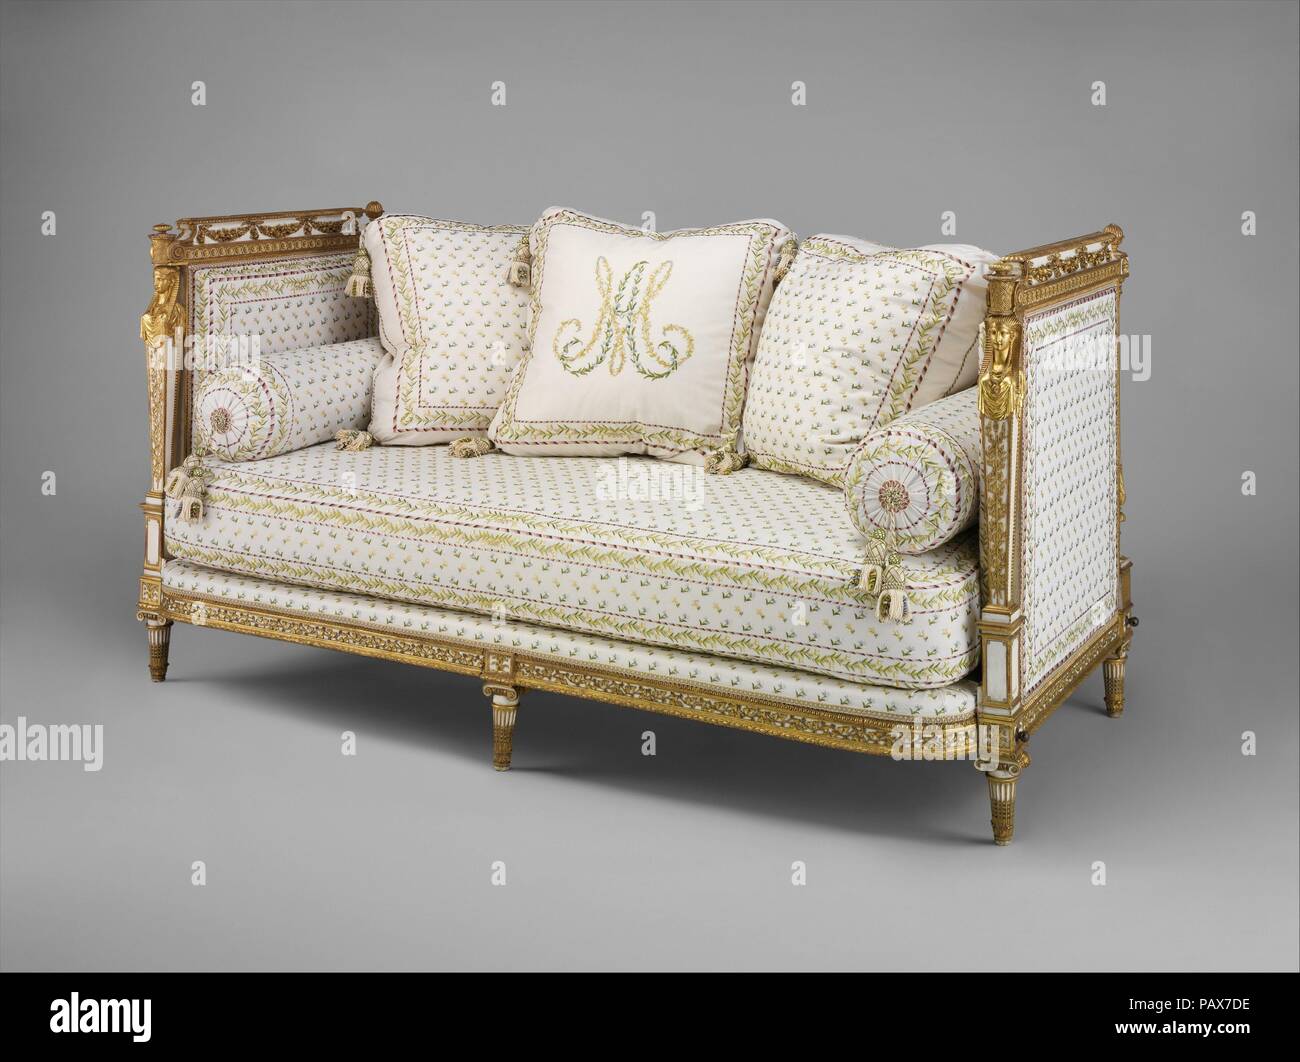 Daybed (Lit de repos or sultane) (part of a set). Culture: French, Paris. Dimensions: H. 36-1/2 x W. 69 x D. 31-1/2 in.  (92.7 x 175.3 x 80.0 cm). Maker: Jean-Baptiste-Claude Sené (1748-1803); painted and gilded by Louis-François Chatard (ca. 1749-1819). Date: 1788.  The Palace of St. Cloud belongs to the Duke of Orleans, is situated on the declivity of a mountain washed by the Seine. . . . The view from the house is delightful.  -- Harry Peckham, A Tour through Holland . . .and Part of France  Louis XVI purchased the country residence of the duc d'Orléans a few miles west of Paris for Marie-A Stock Photo